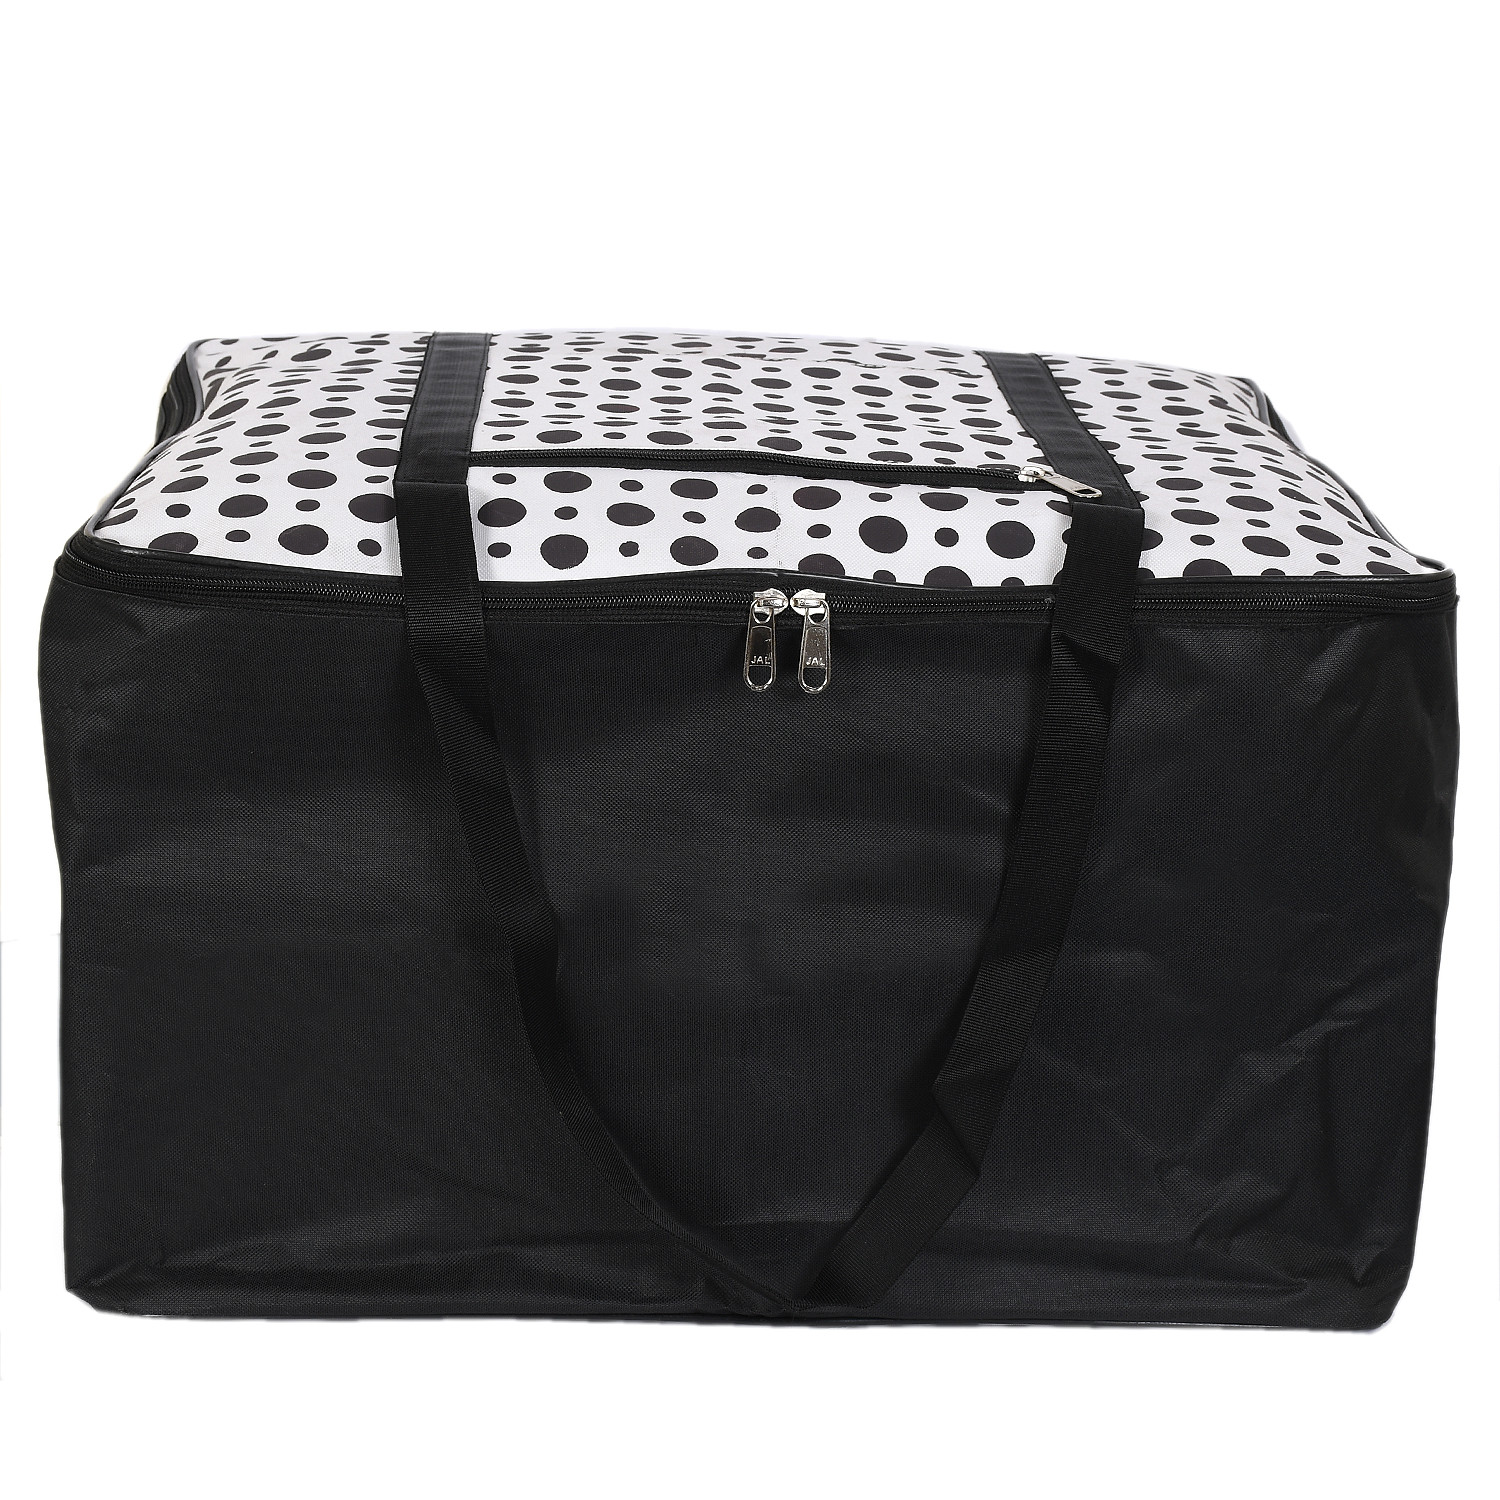 Kuber Industries Polka Dots Design Canvas Jumbo Underbed Moisture Proof Storage Bag with Zipper Closure and Handle (Black & White)